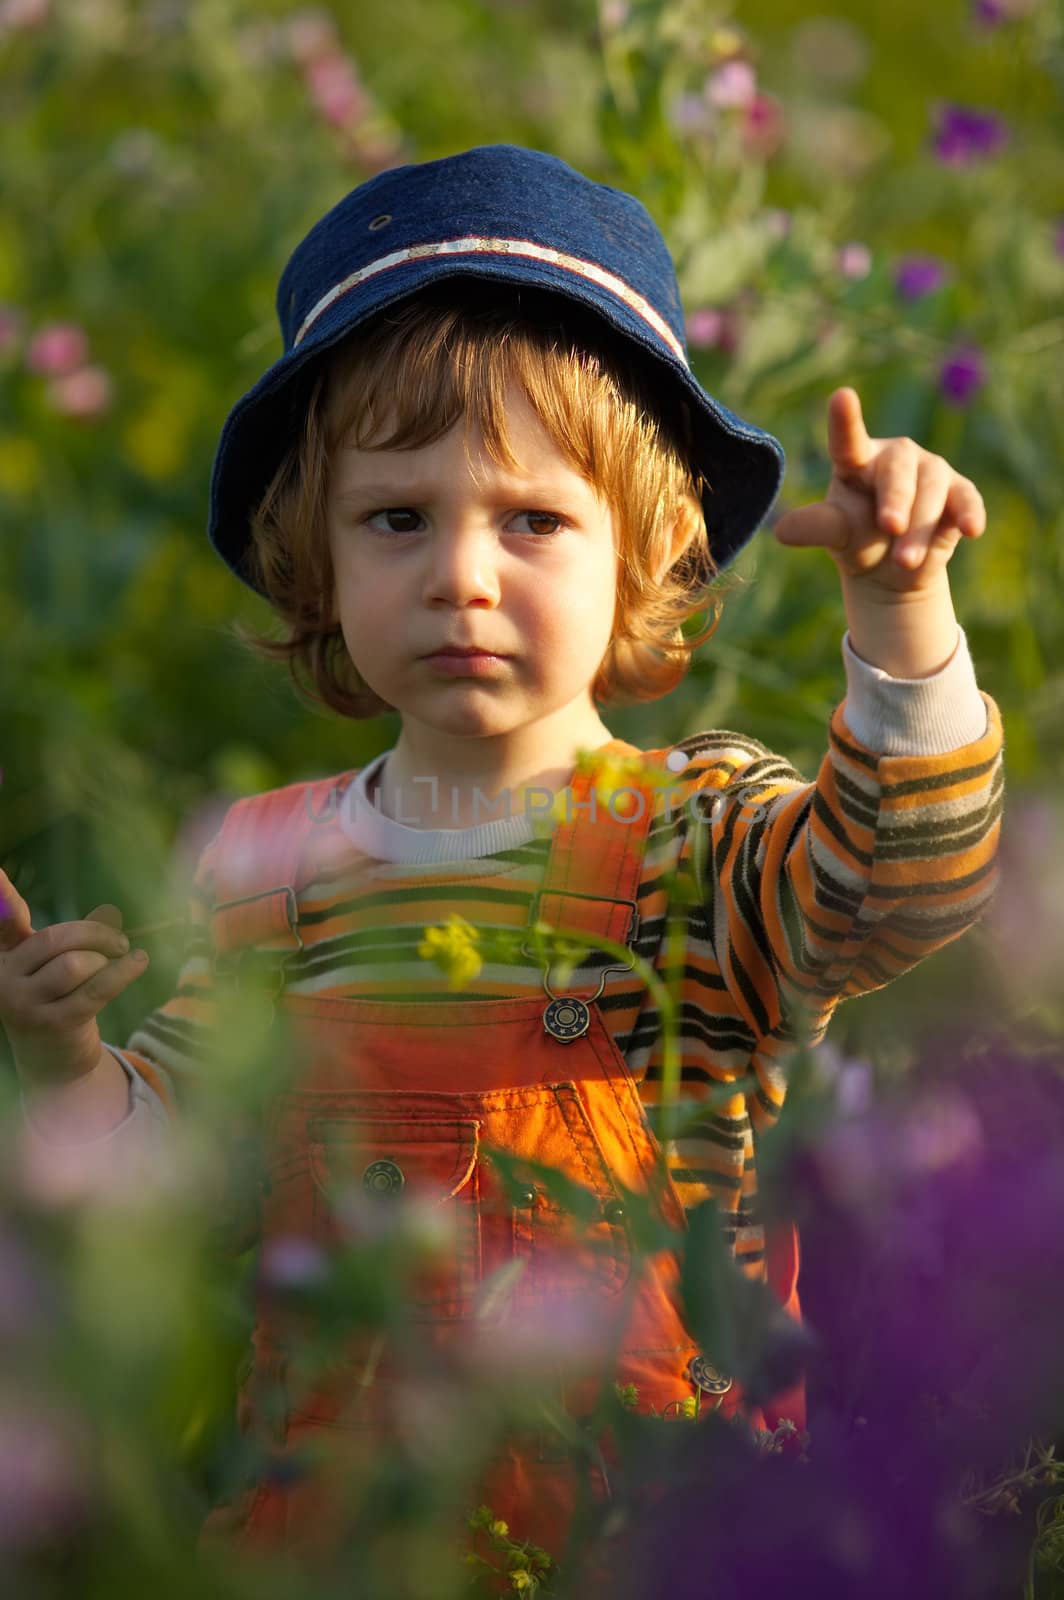 Little boy with hat pointing with finger in a flowers field at sunset